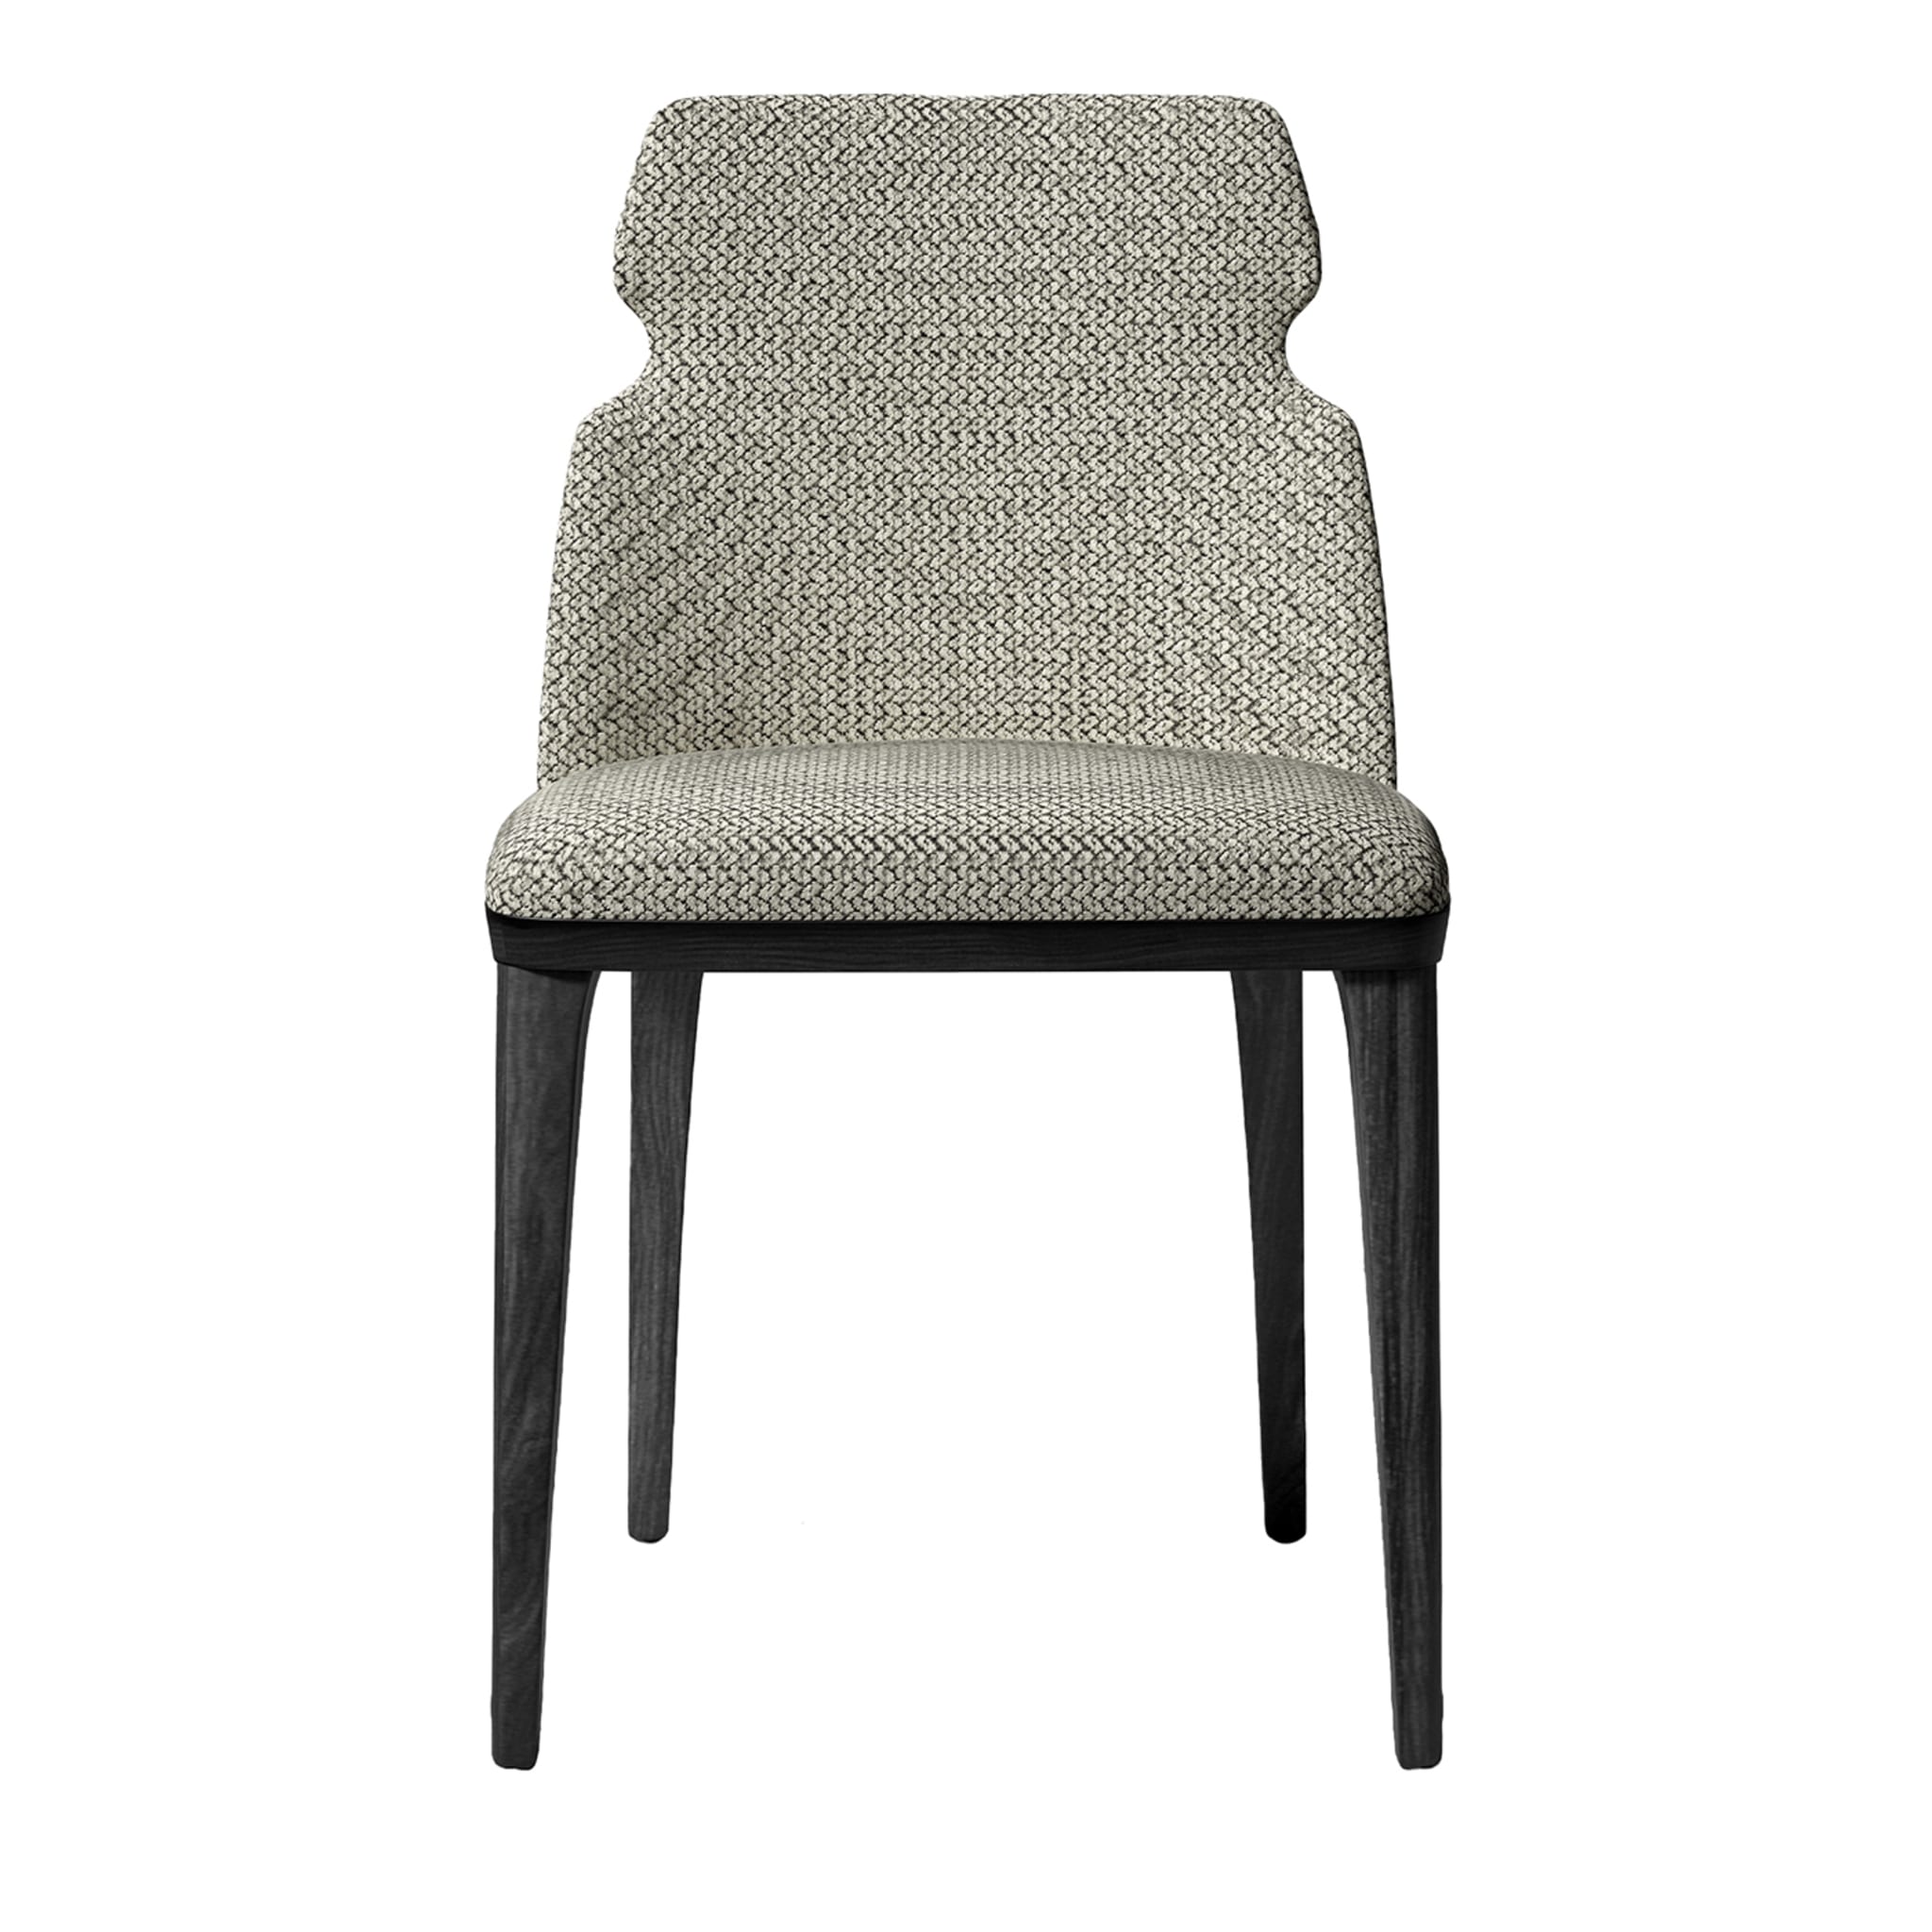 Shape Patterned Gray Chair - Main view